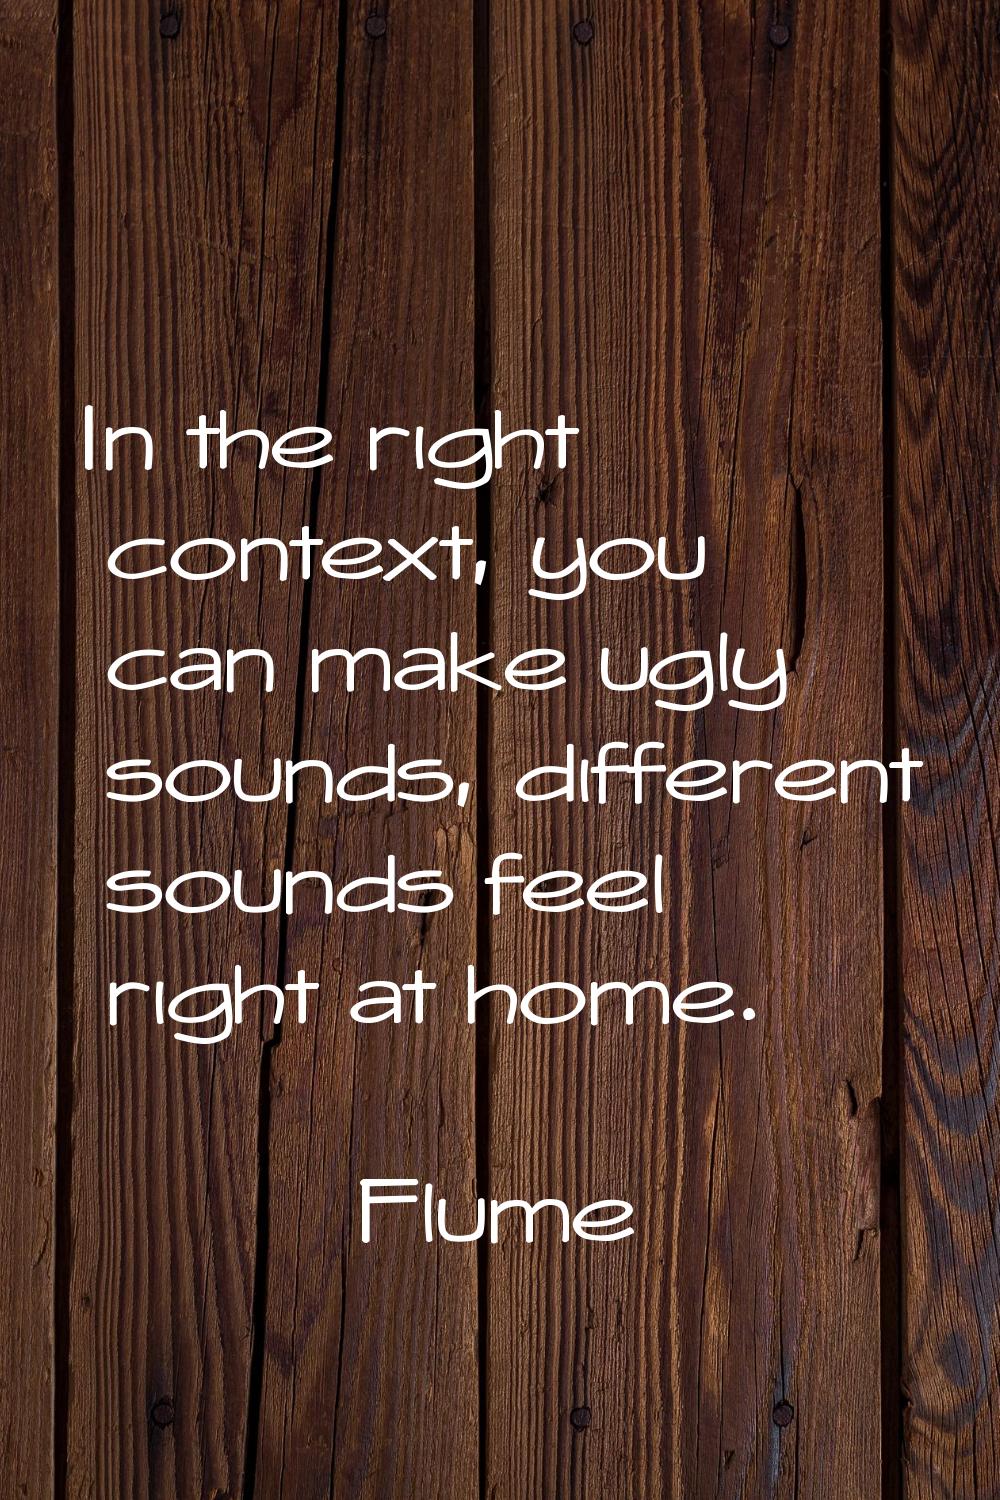 In the right context, you can make ugly sounds, different sounds feel right at home.